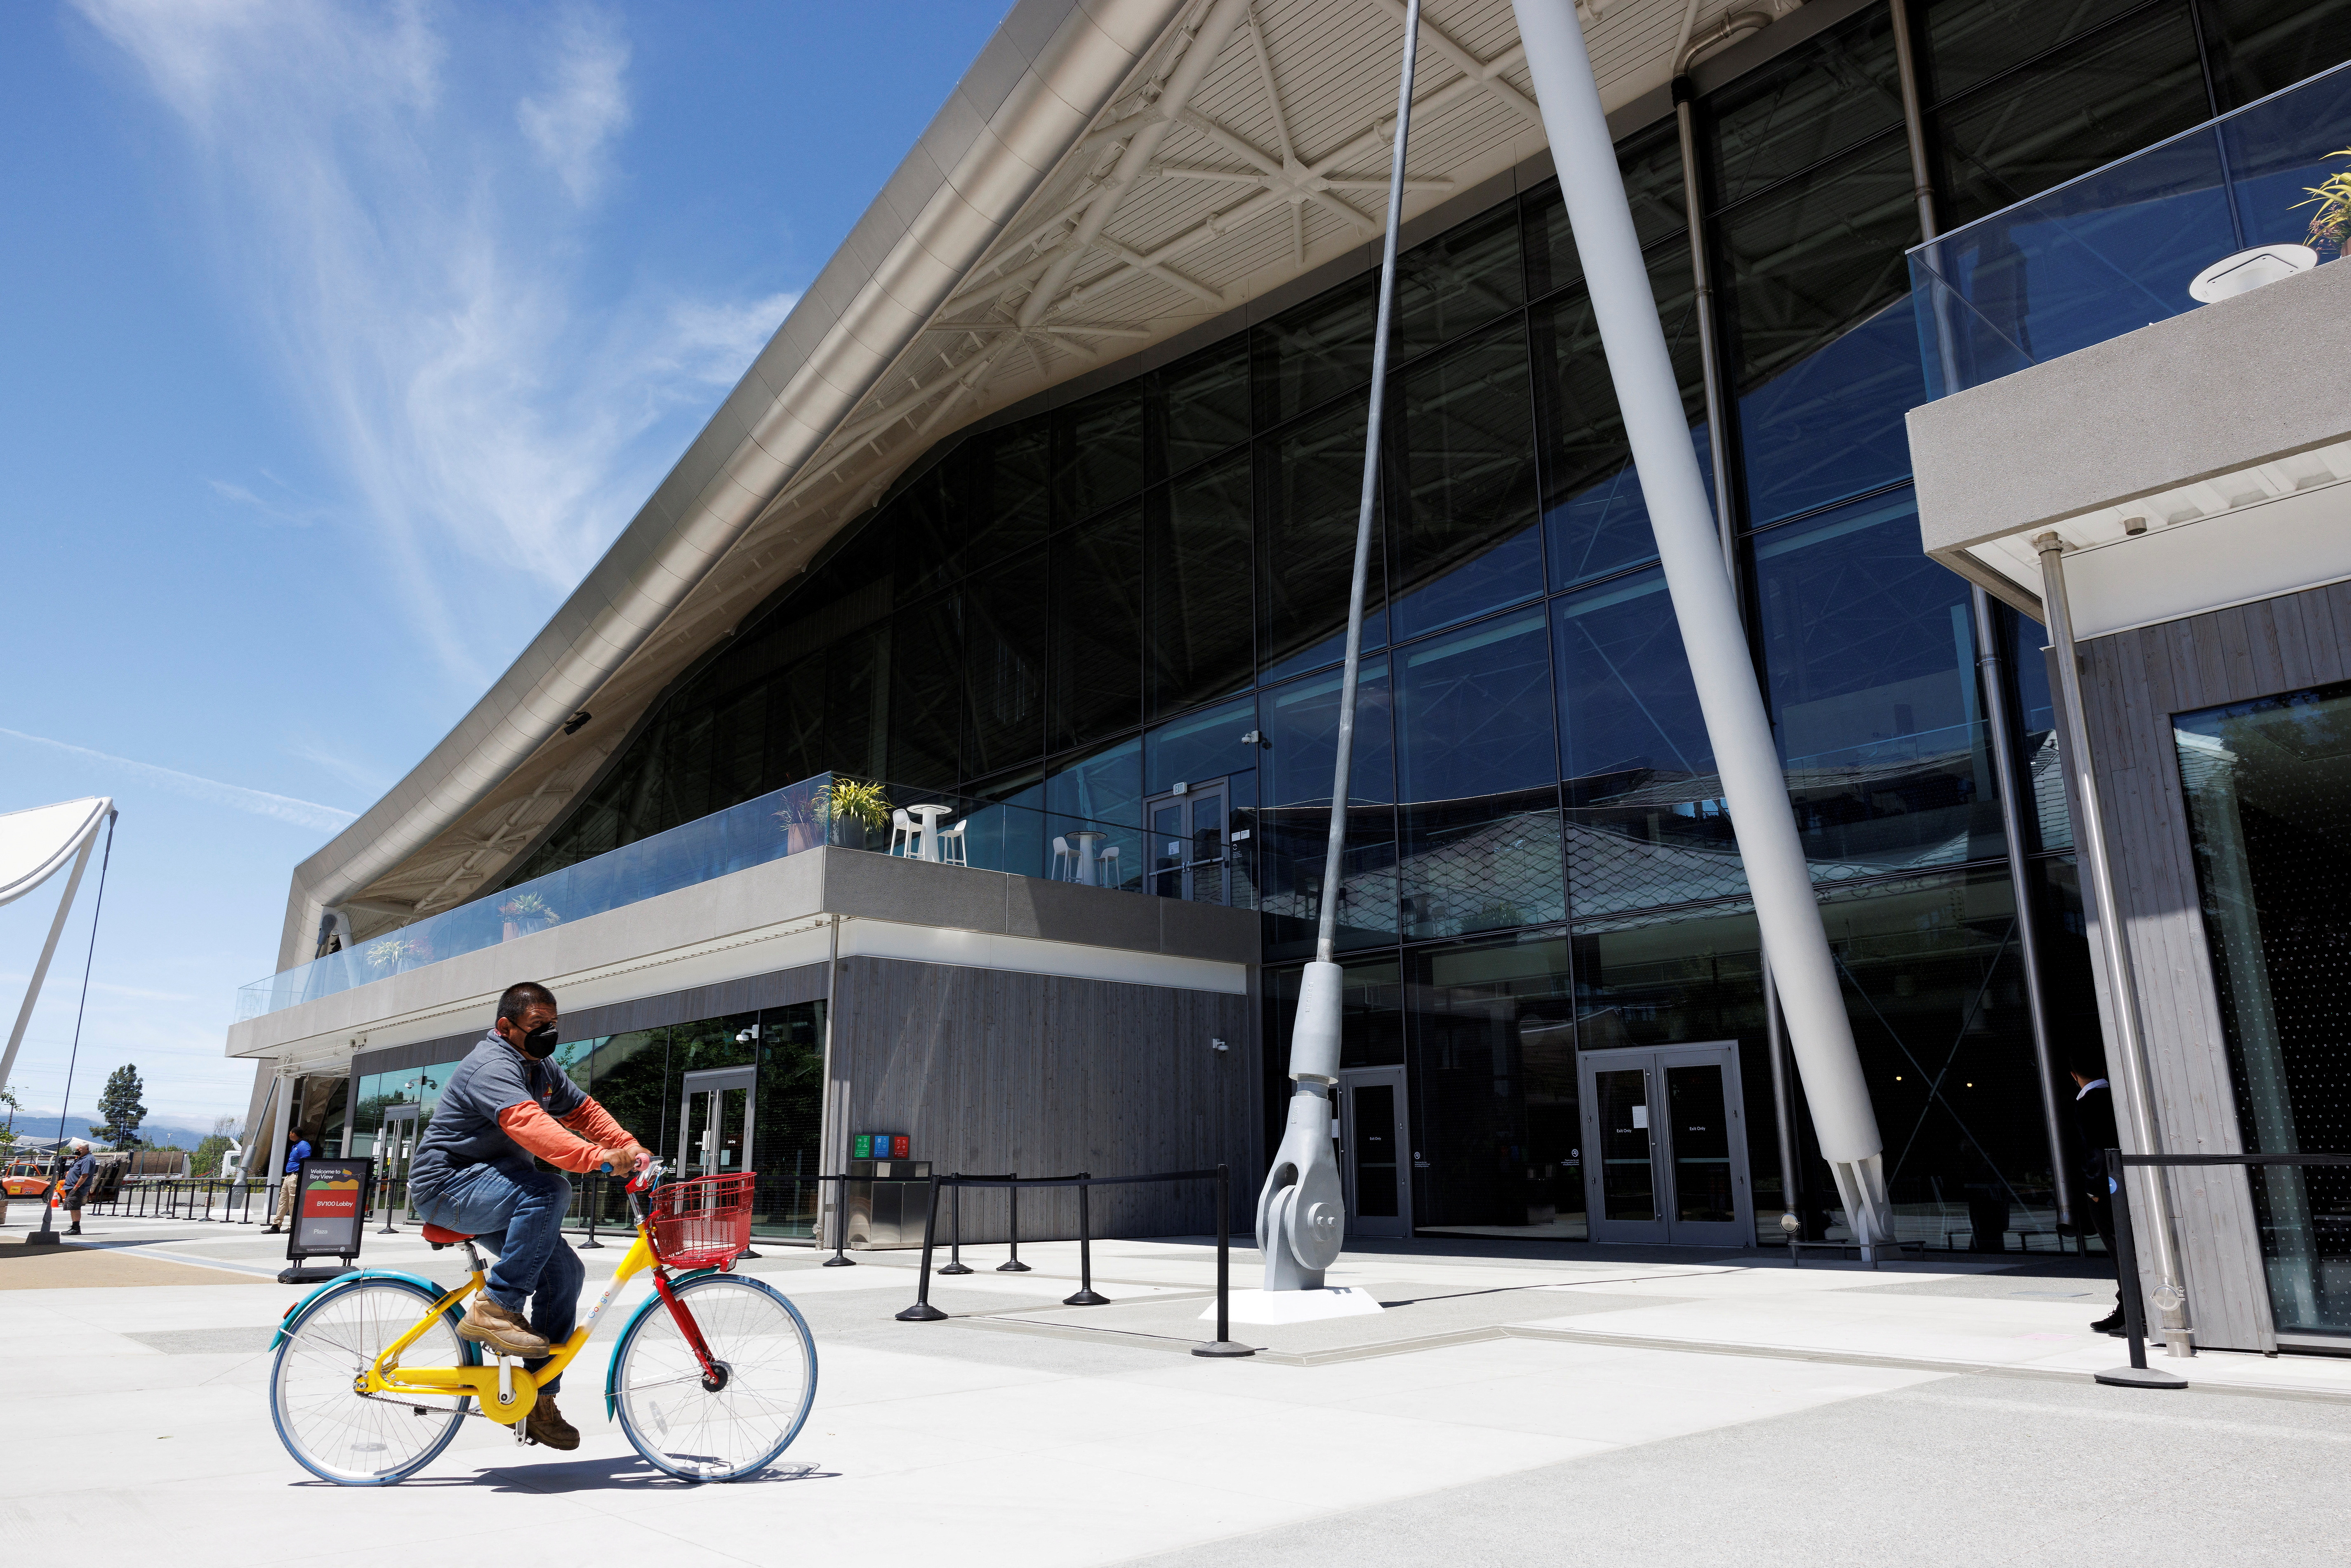 Tour of Google's new Bay View Campus in Mountain View